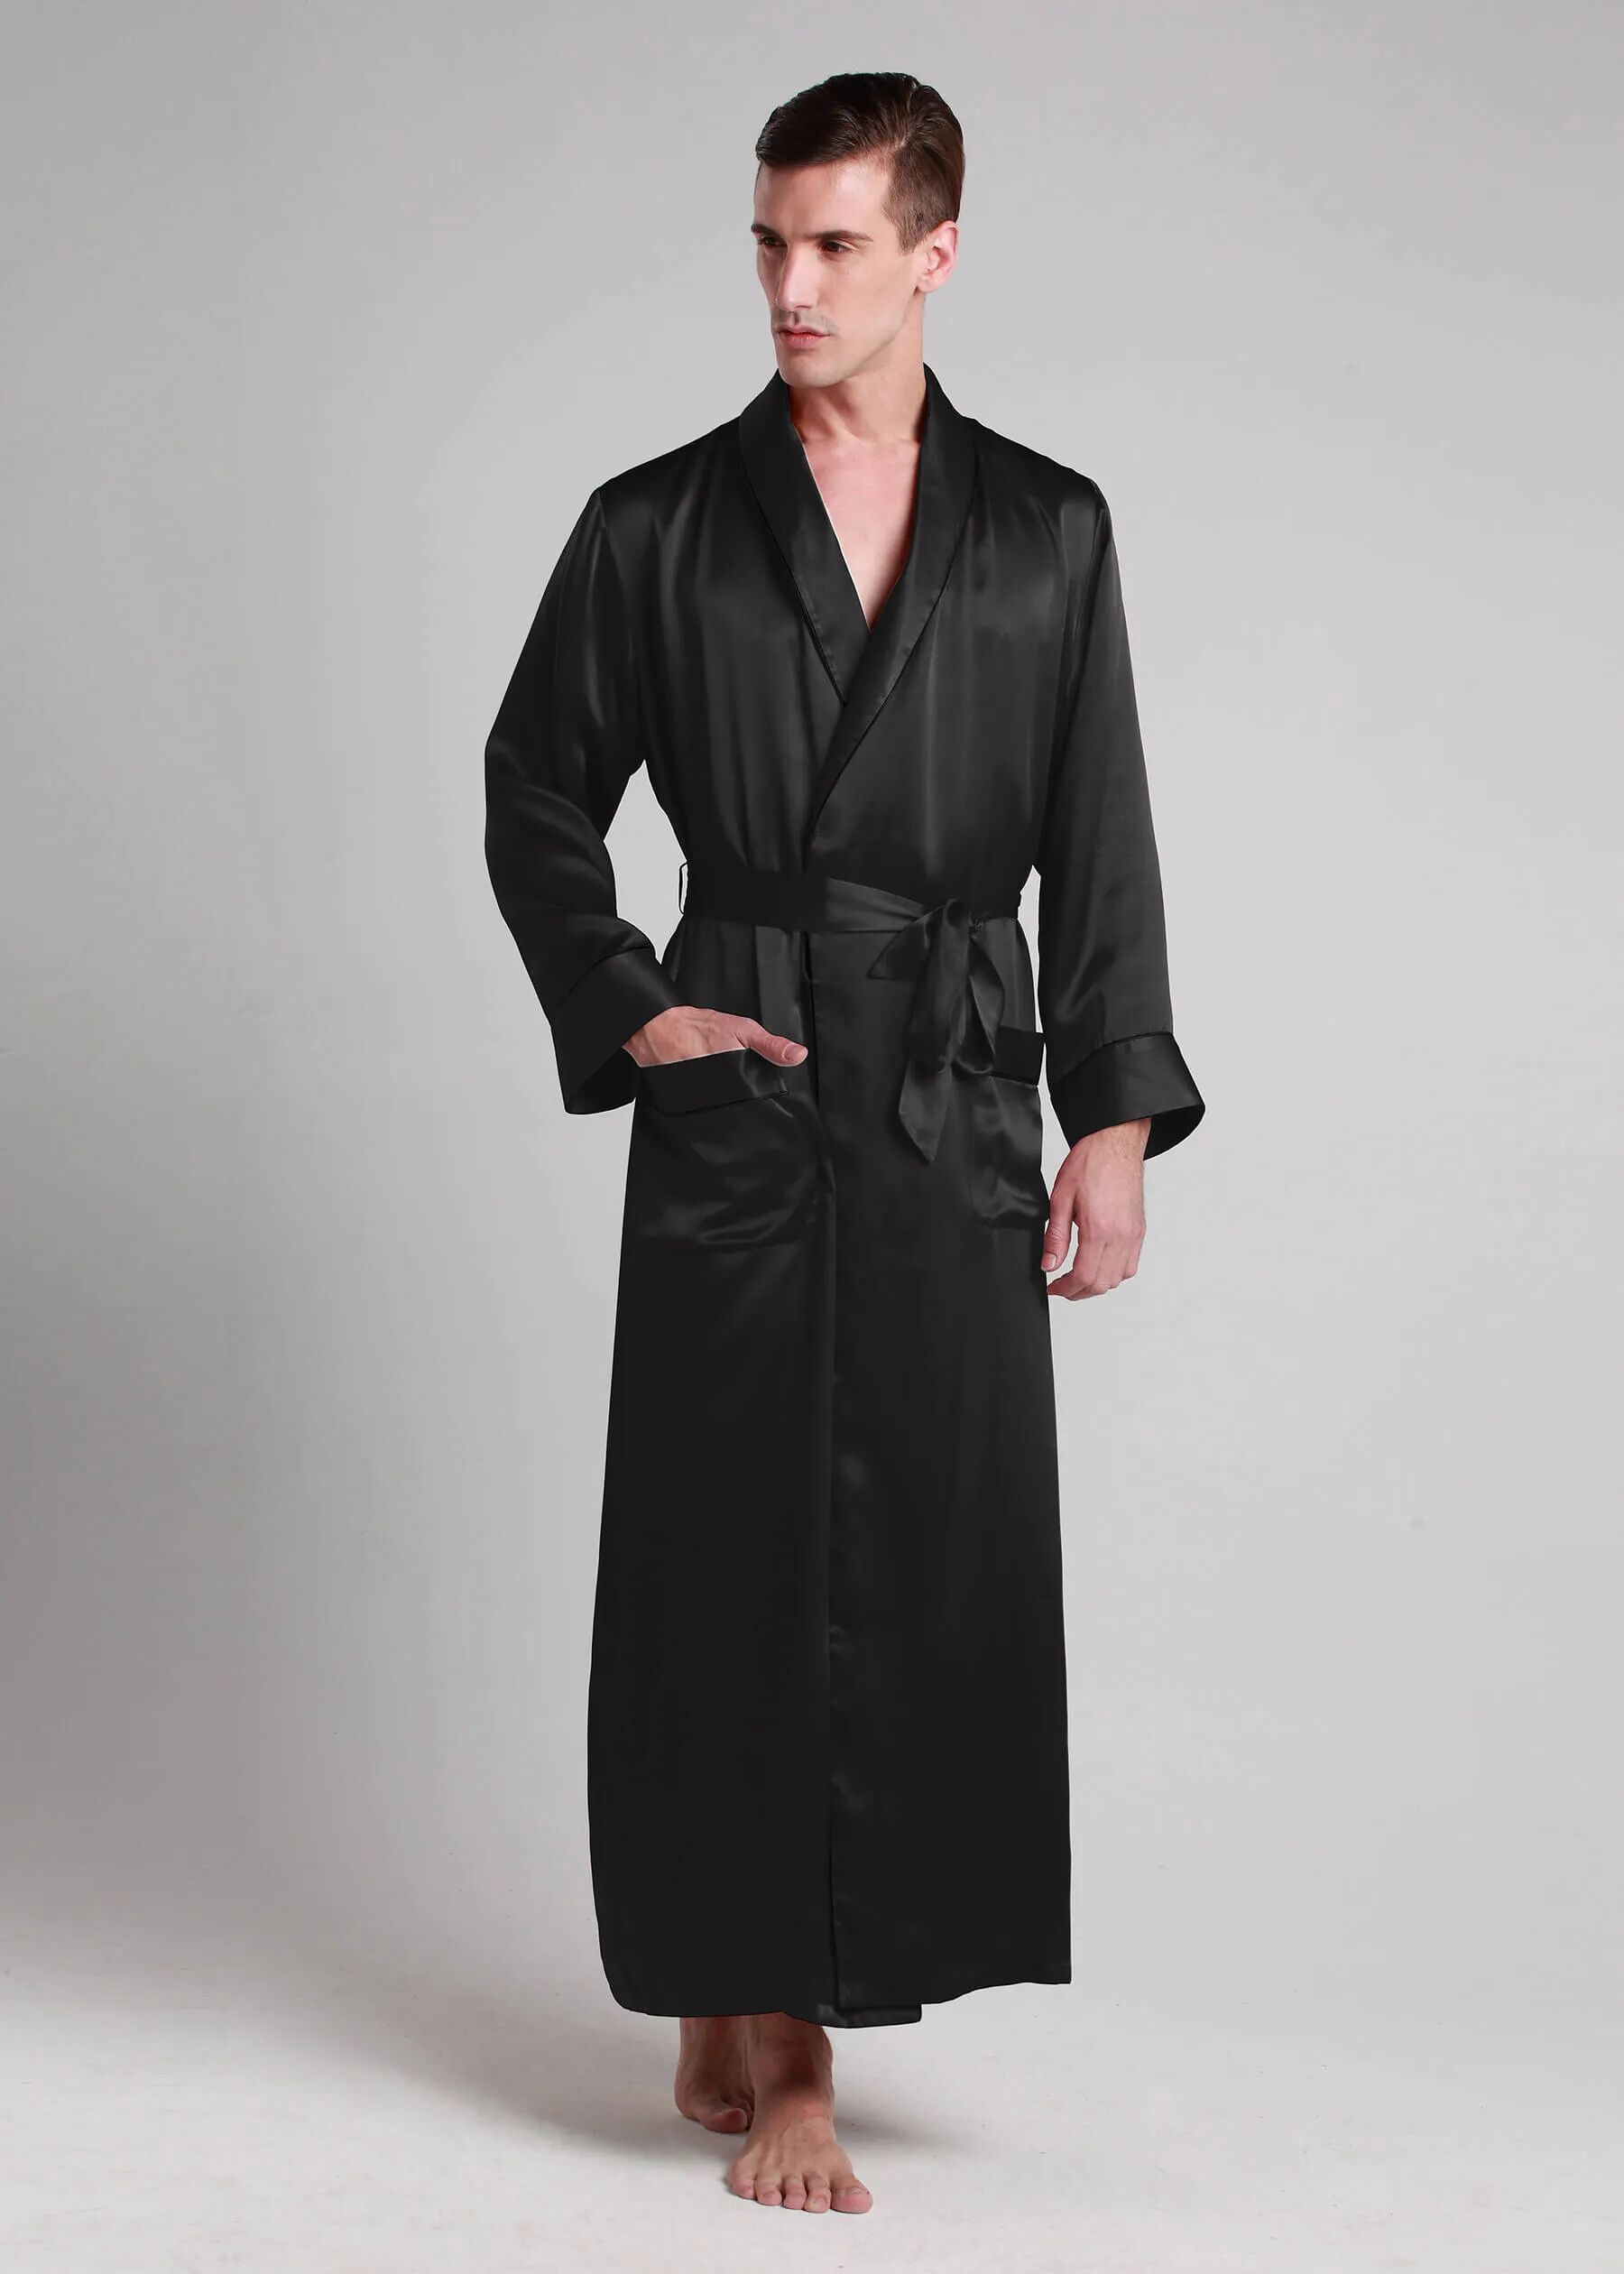 LILYSILK Silk Robes Men's Classic Black L Personalized An Essential Item To Enhance Your Sleep